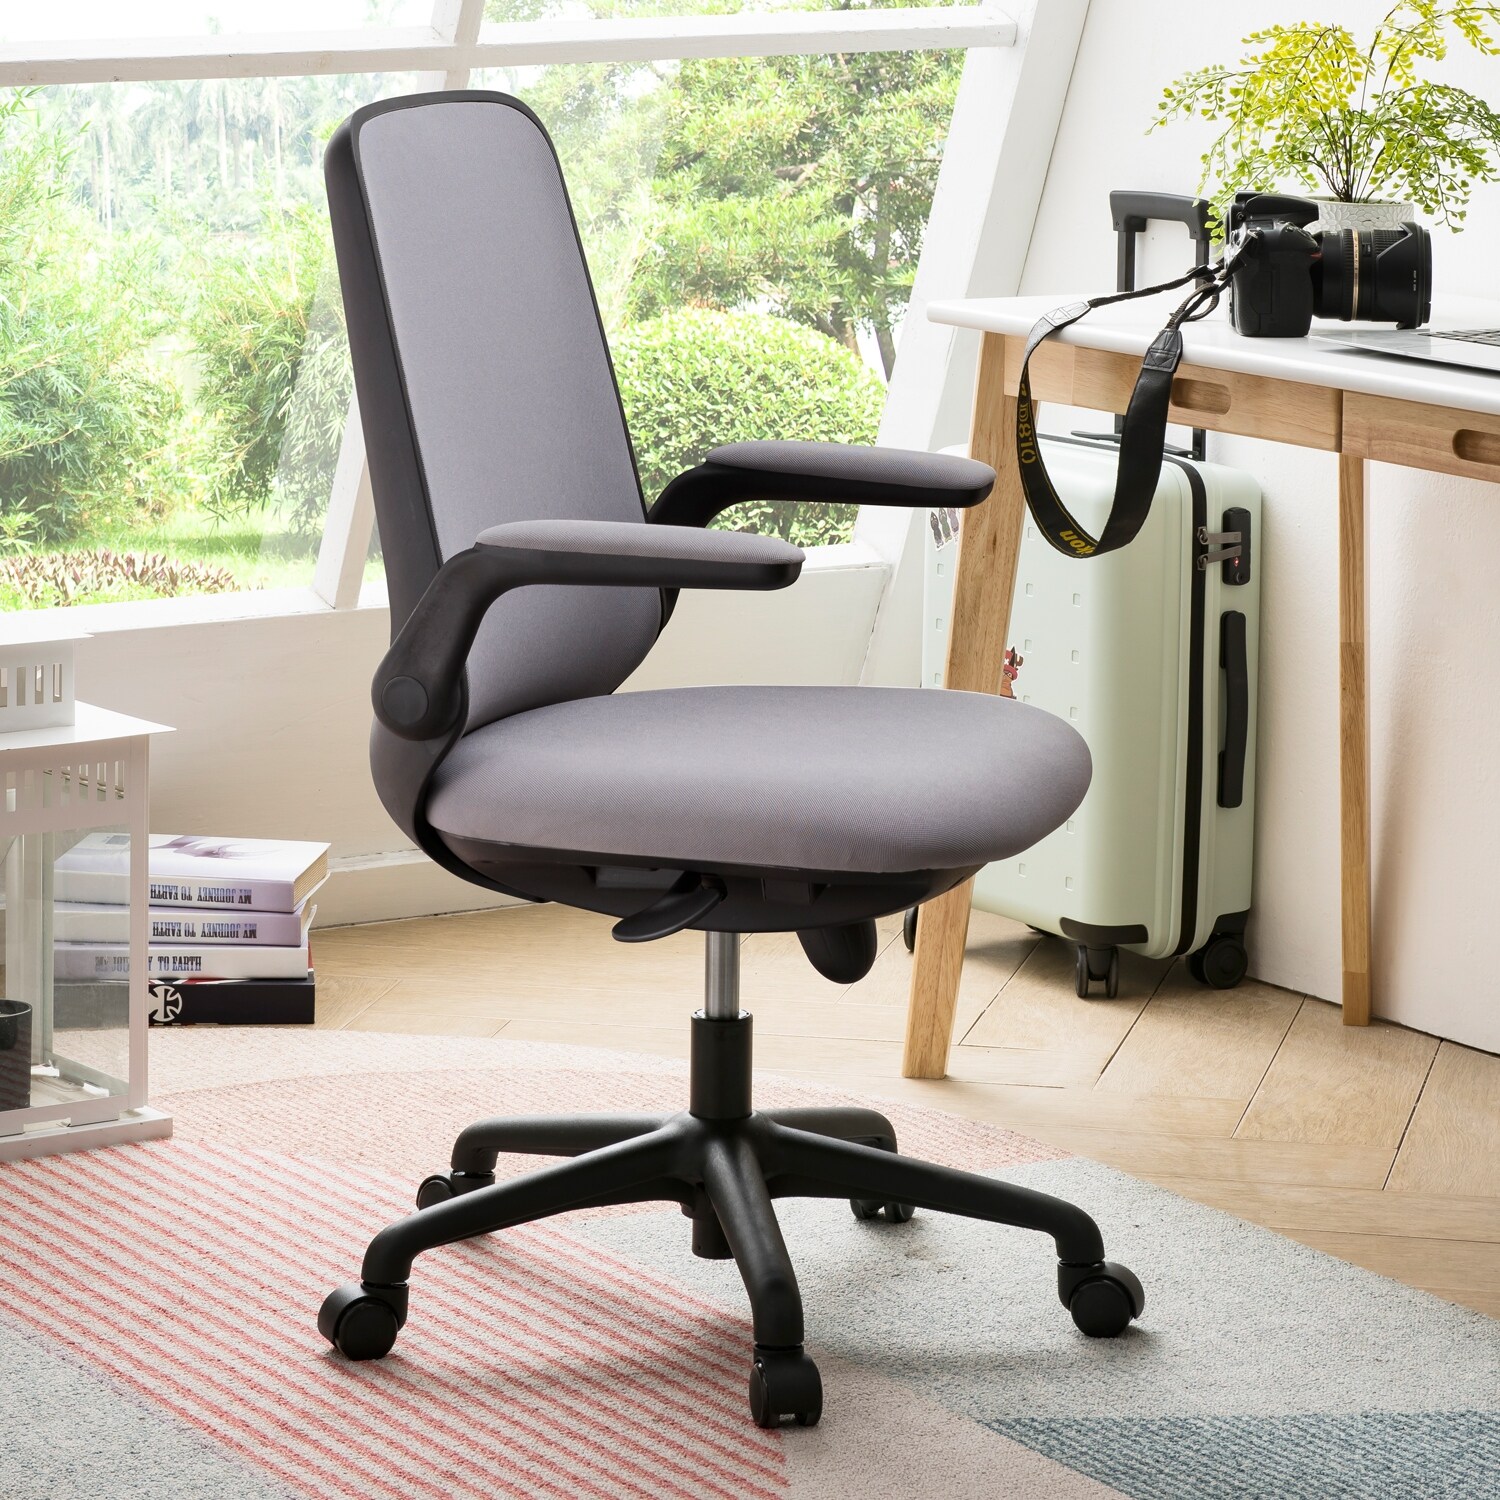 ovios cute desk chairfabric office chair for home or  officemoderncomfortblenice task chair for computer desk